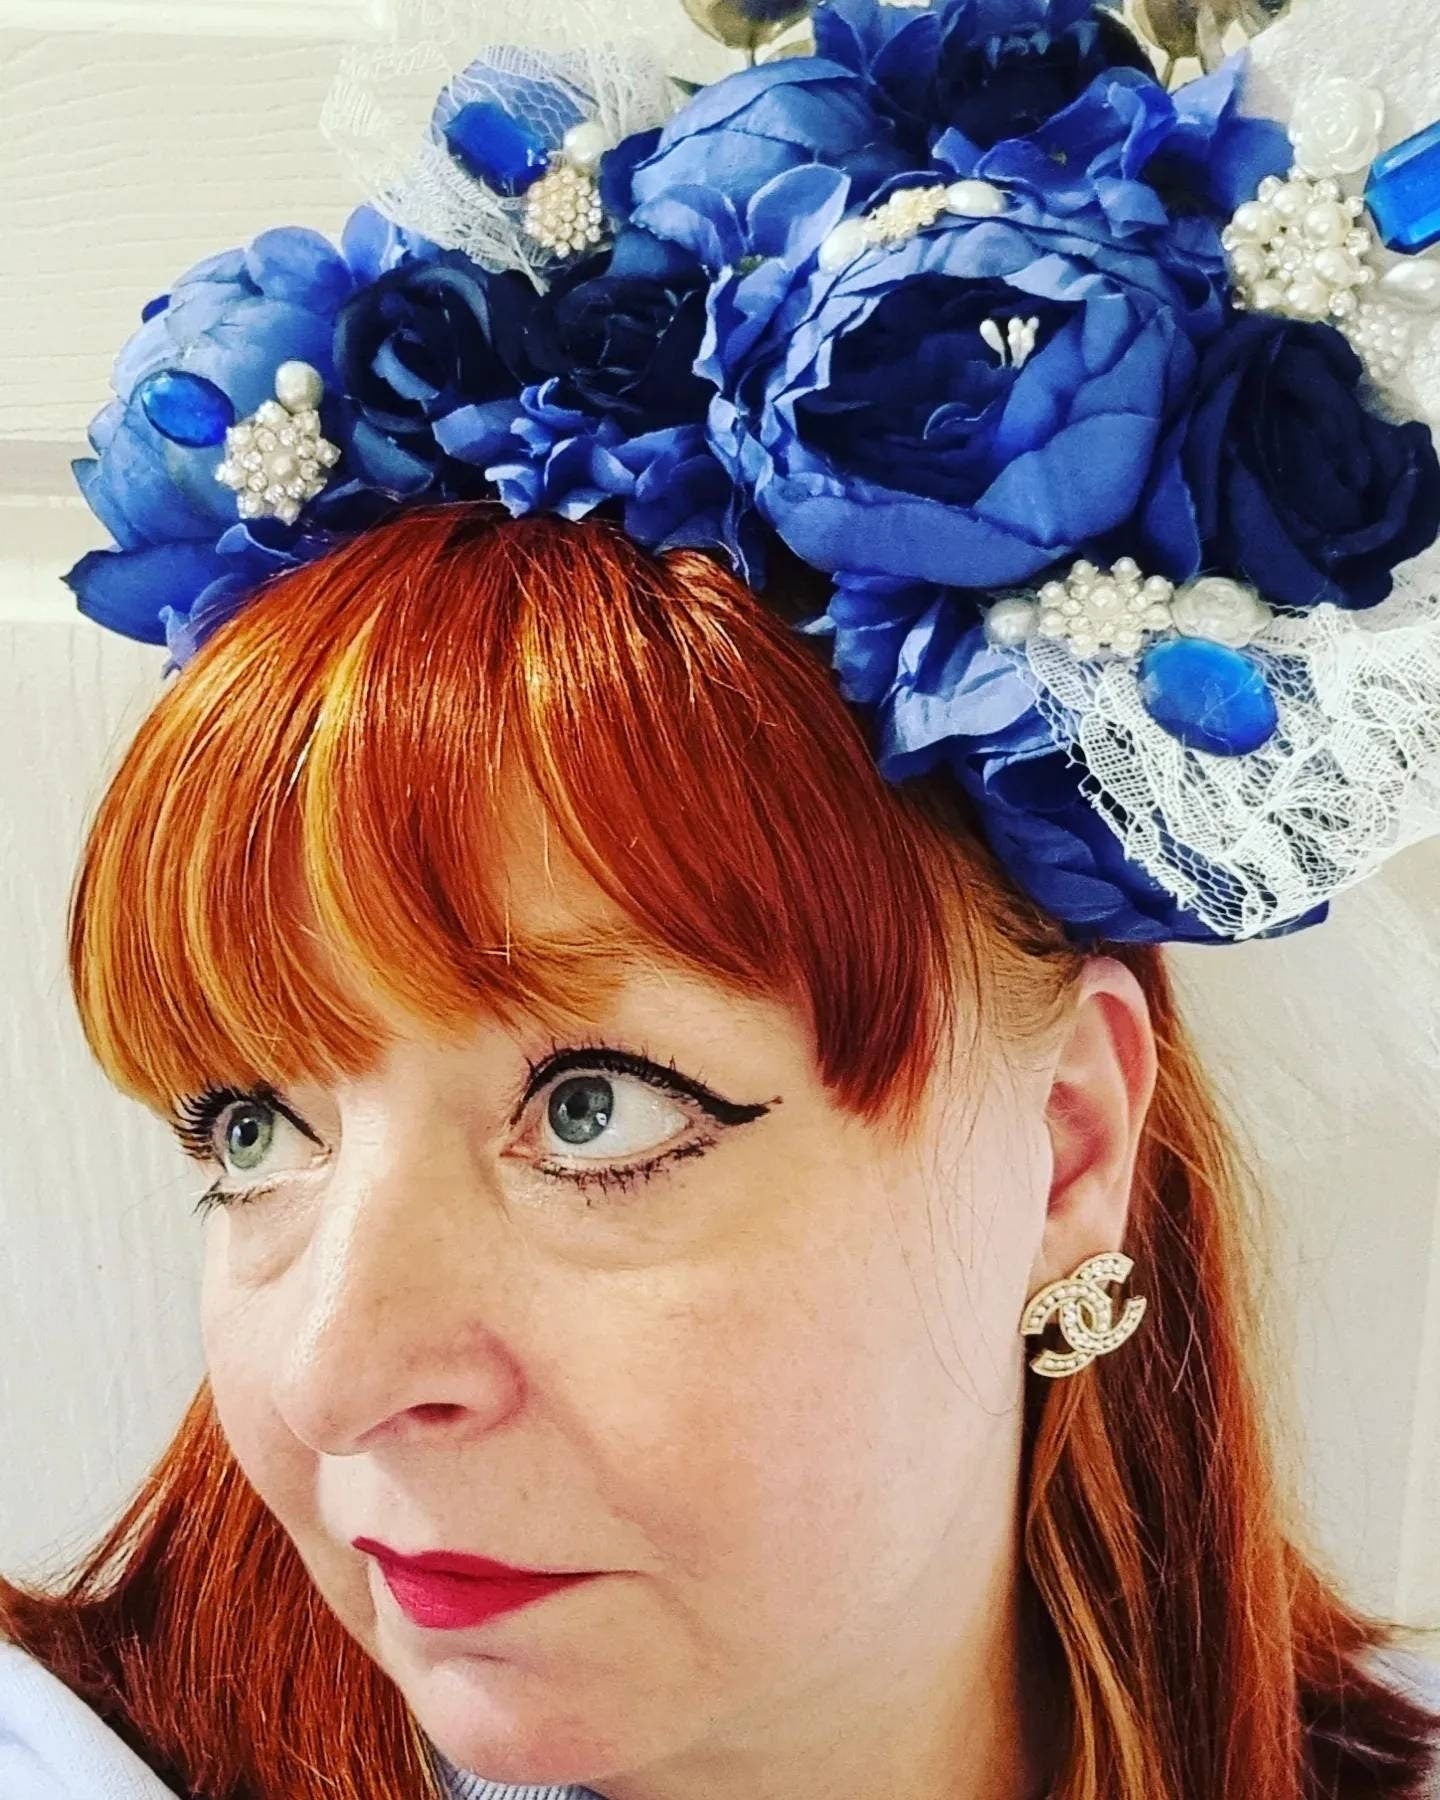 royal blue navy white fascinator boho flower crown headpiece pearls jewels lace Woodland wedding flower girl hen party prom races womens